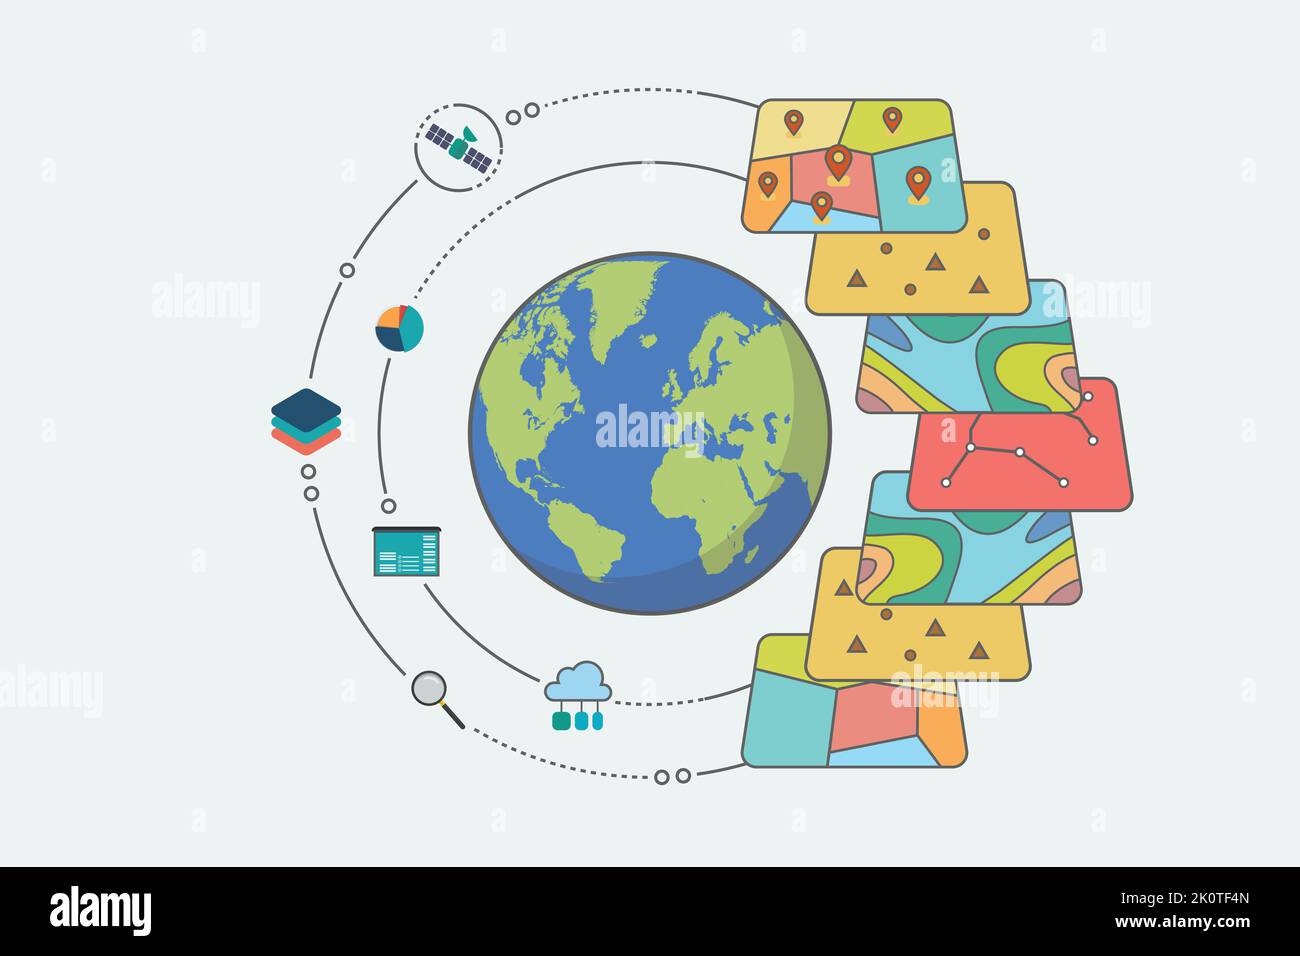 Geographic Information System. GIS Spatial Data Layers Concept for Business Analysis. Vector illustration. Stock Vector